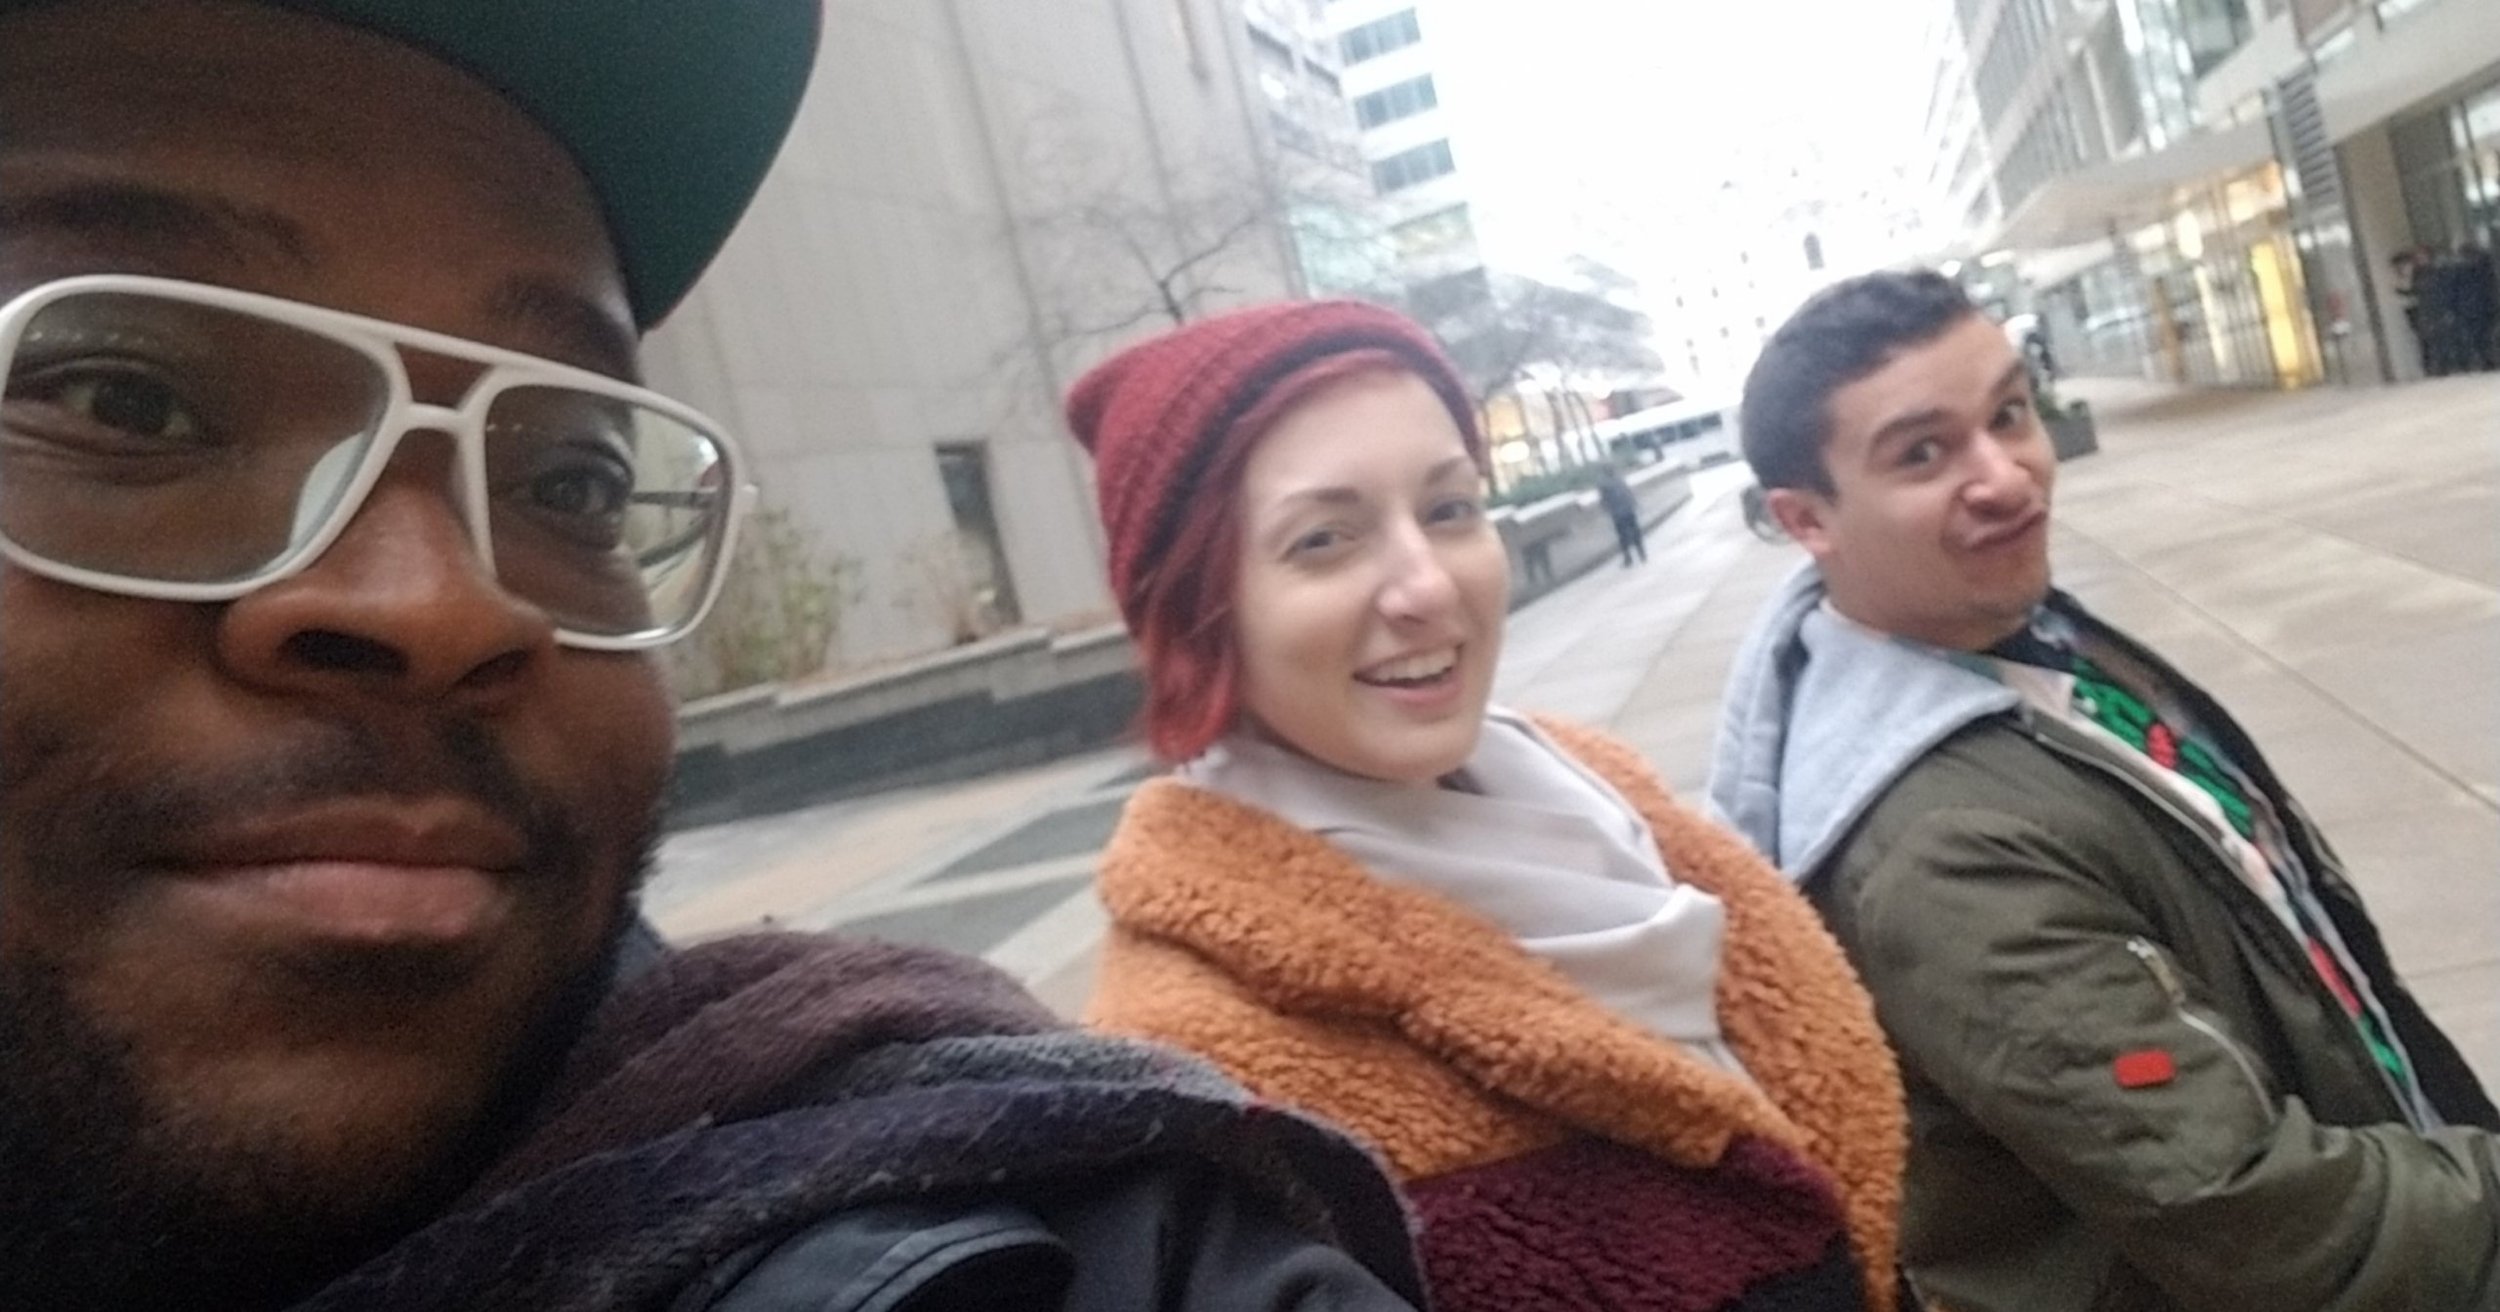  Our Executive Director and two friends of Noteworthy on their way to buy toys for the Support Center for Child Advocates Holiday Toy Drive in December 2019. 